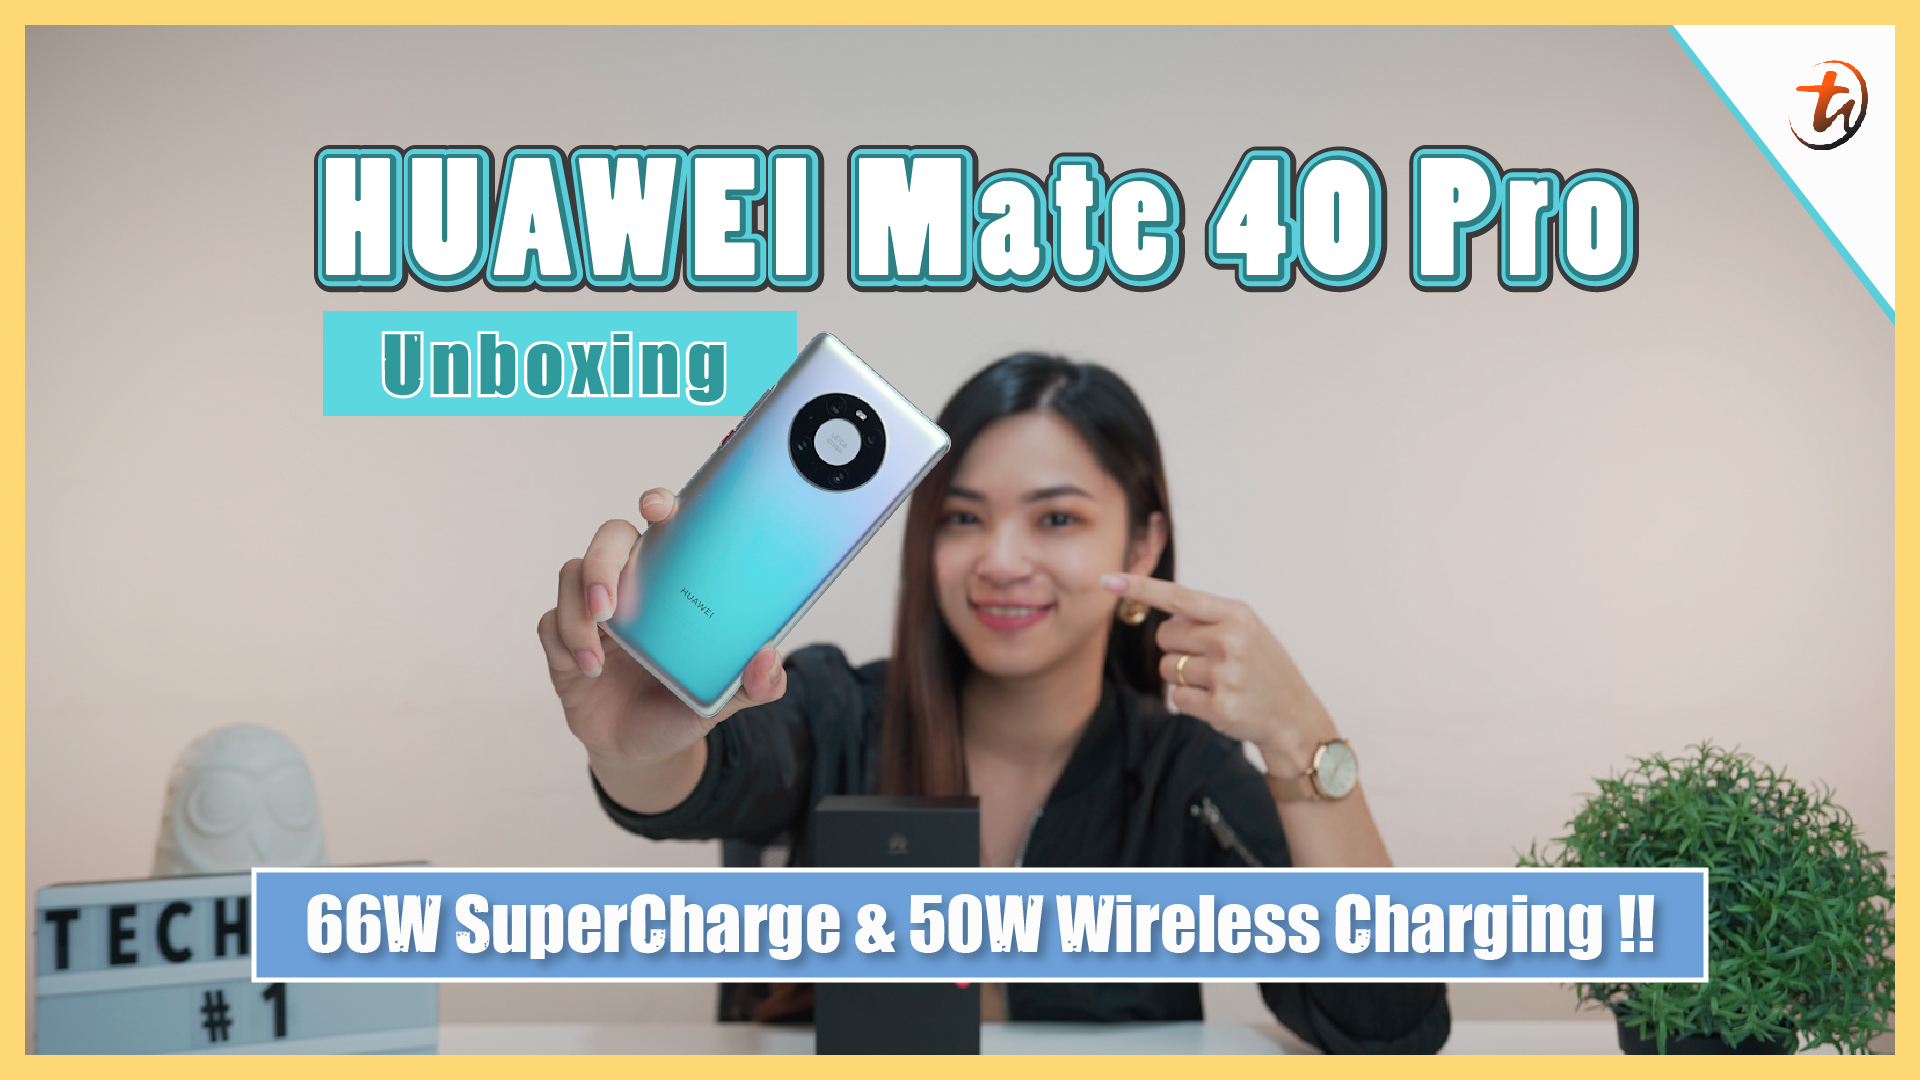 Huawei Mate 40 Pro - Halo Camera and 66W SuperCharge |TechNave Unboxing and Hands-On Video